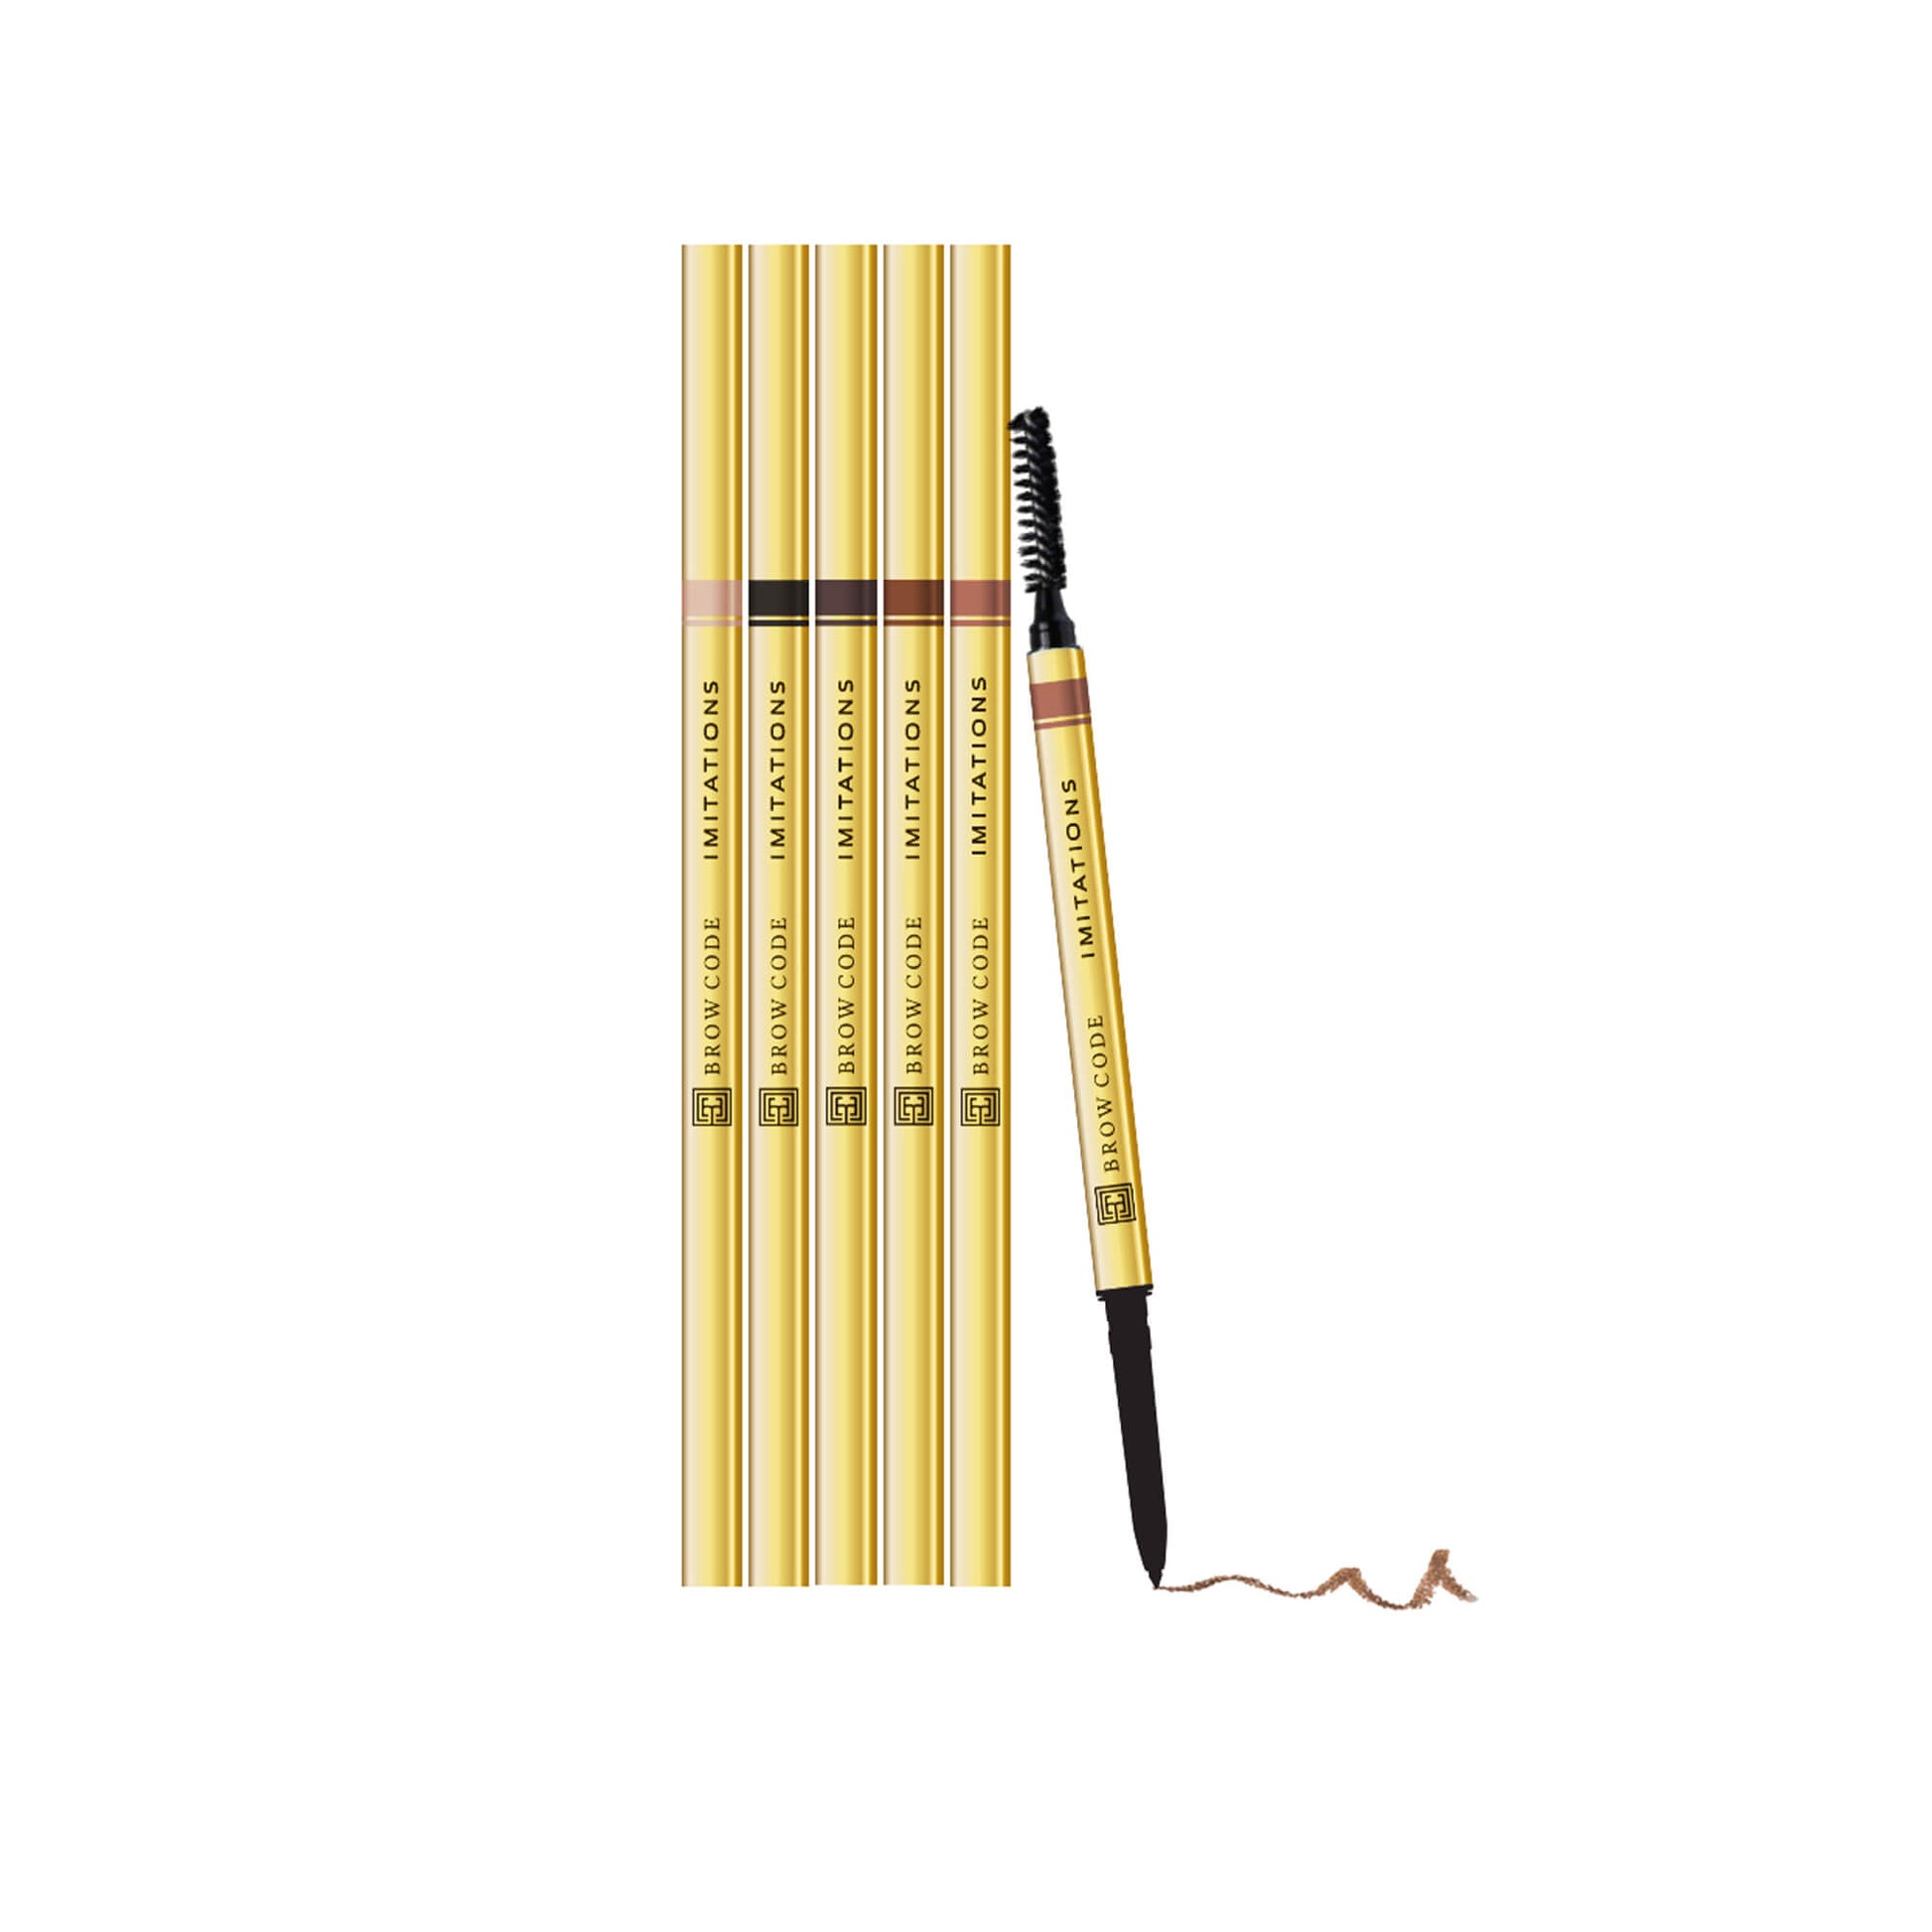 Imitations Micro Pencil Tester Only Kit